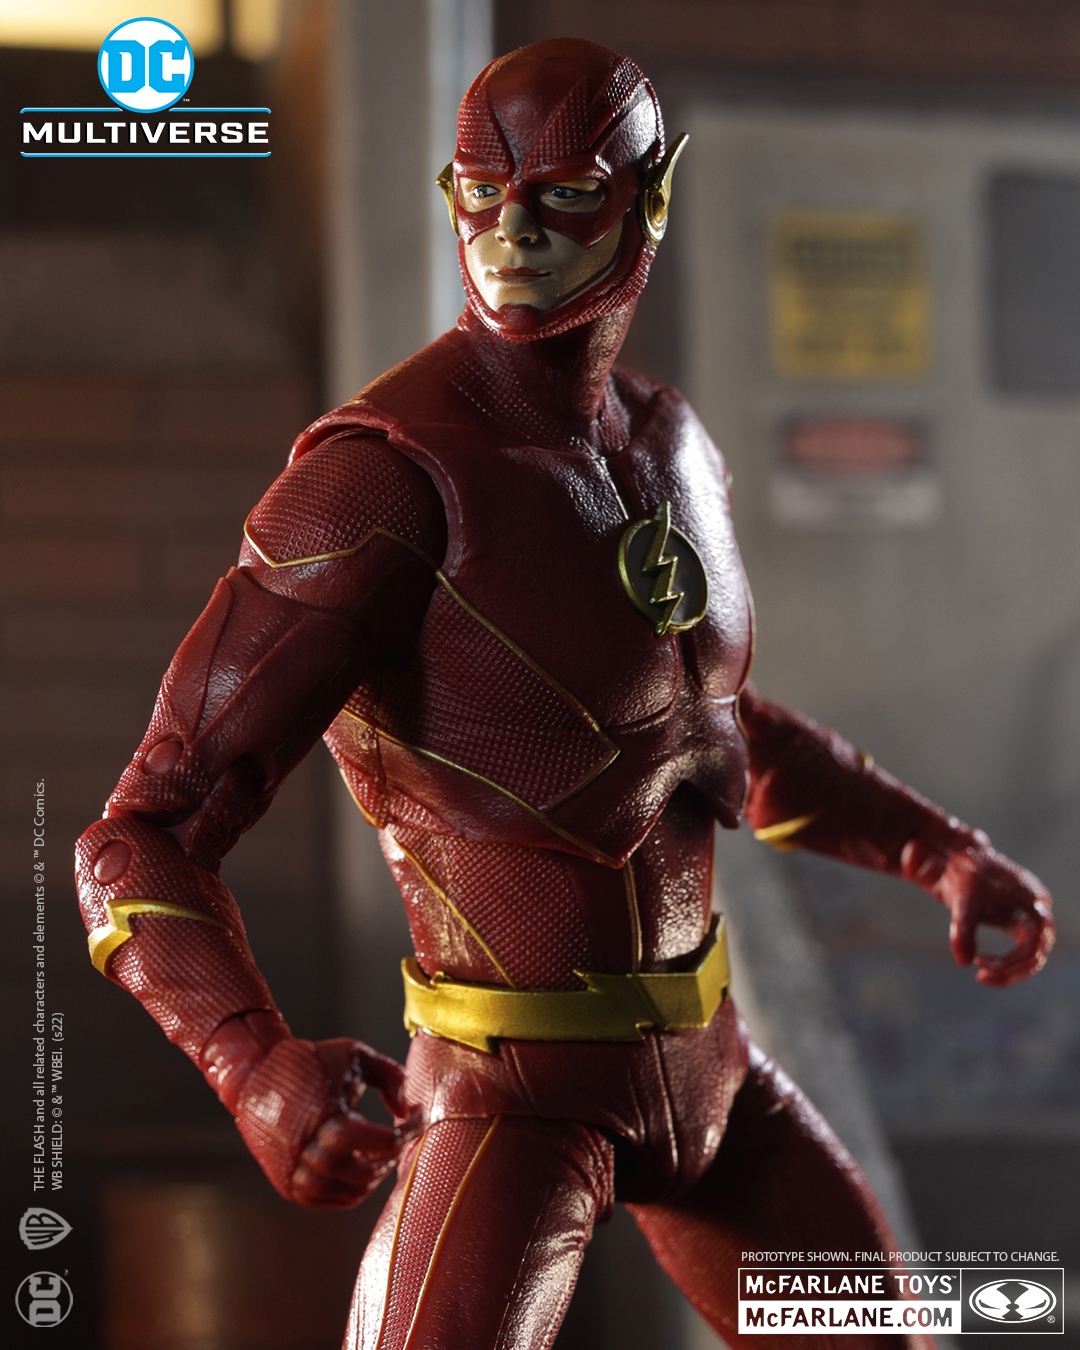 You are currently viewing DC Multiverse Flash TV Season 7 Flash Teaser – The Toyark